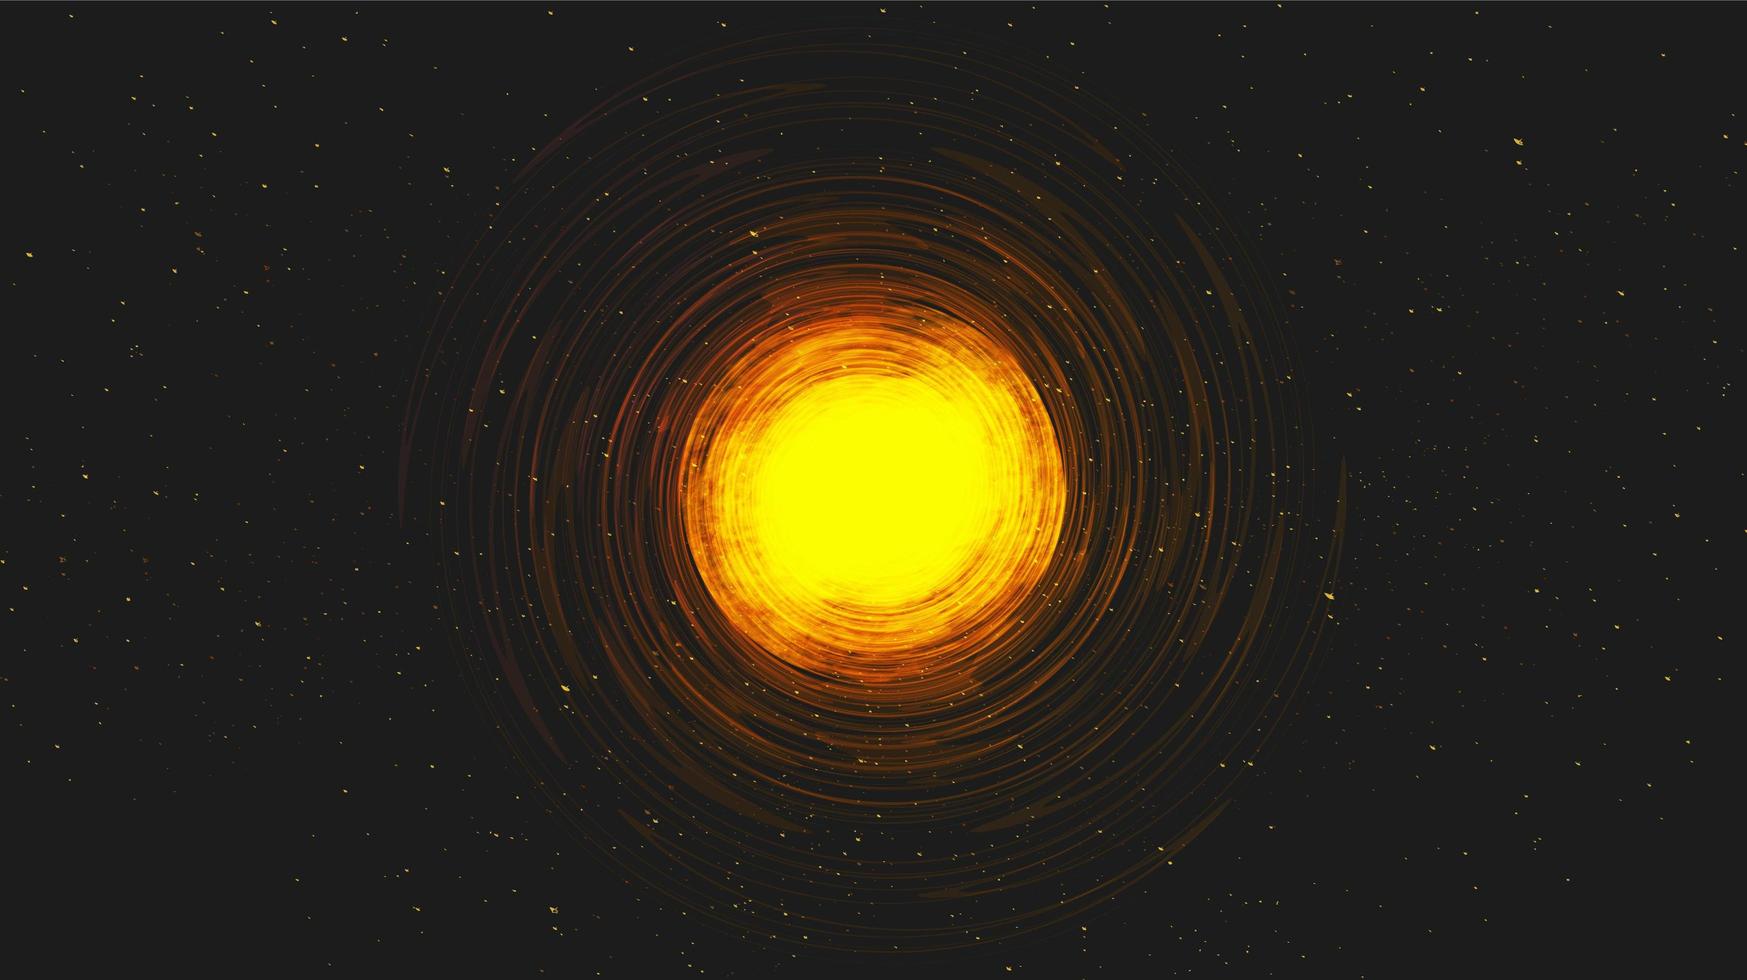 Realistic Light Spiral Black Hole on Galaxy Background vector